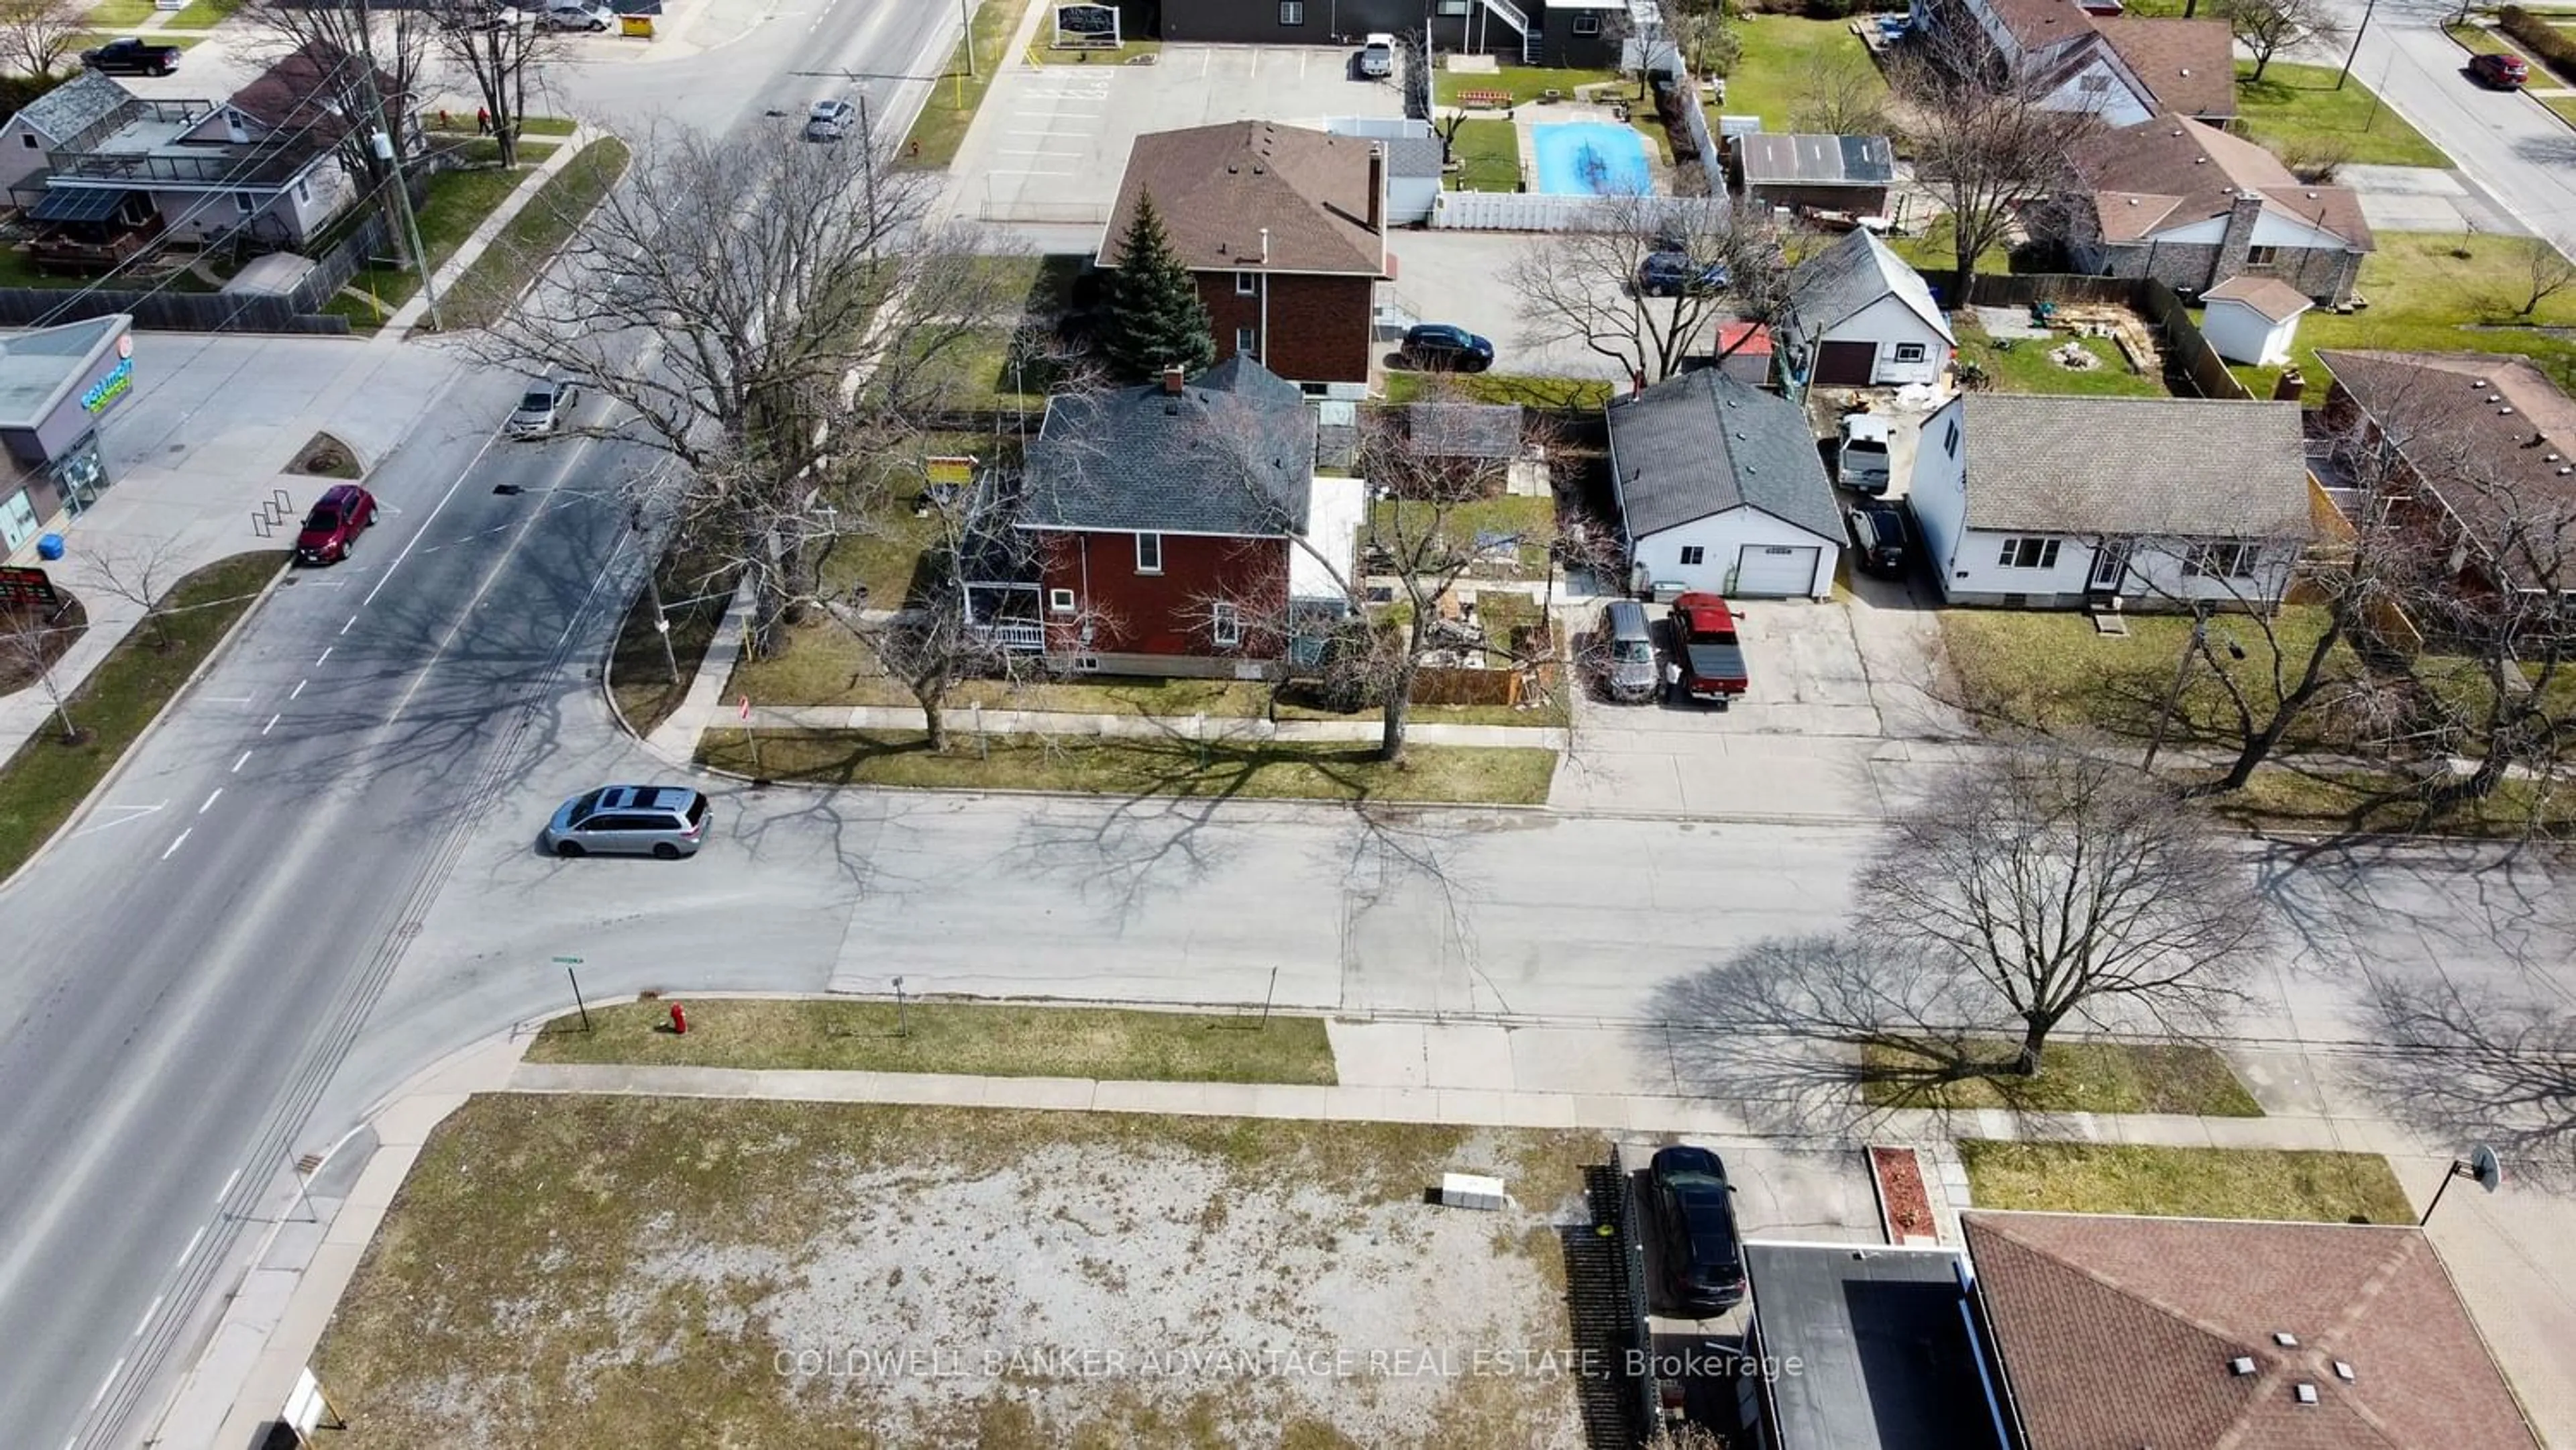 Street view for 819 East Main St, Welland Ontario L3B 3Y8